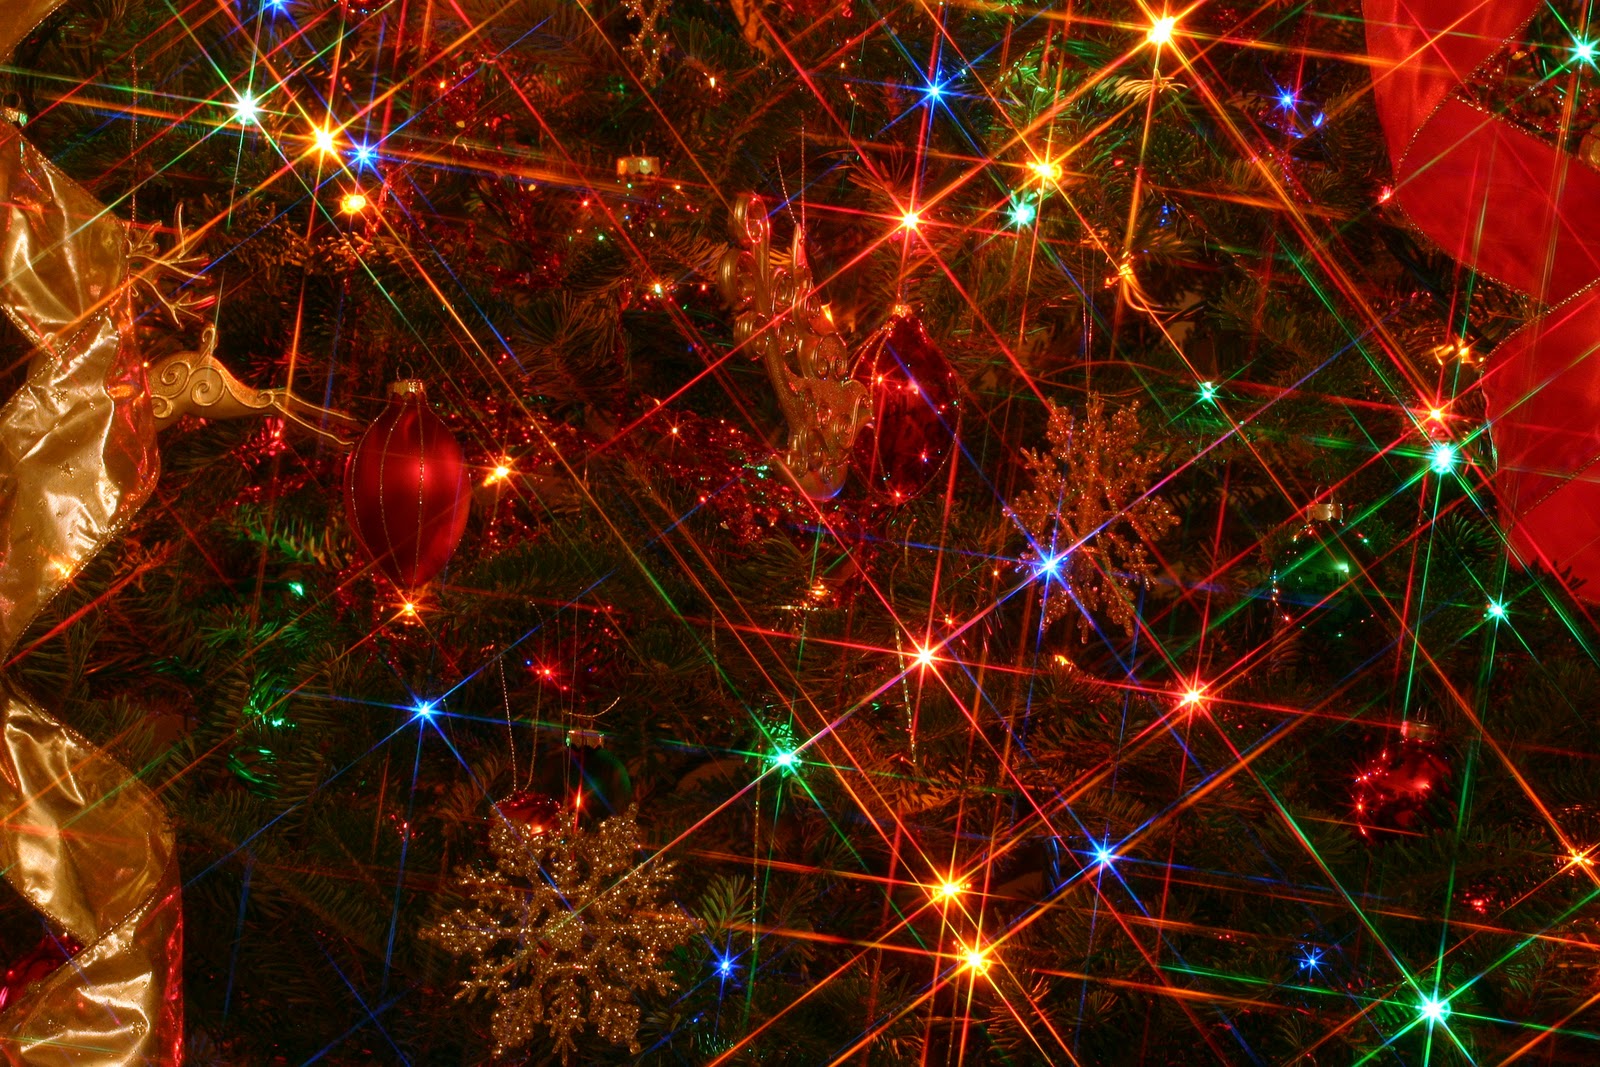 2015 Christmas lights background - wallpapers, images, photos